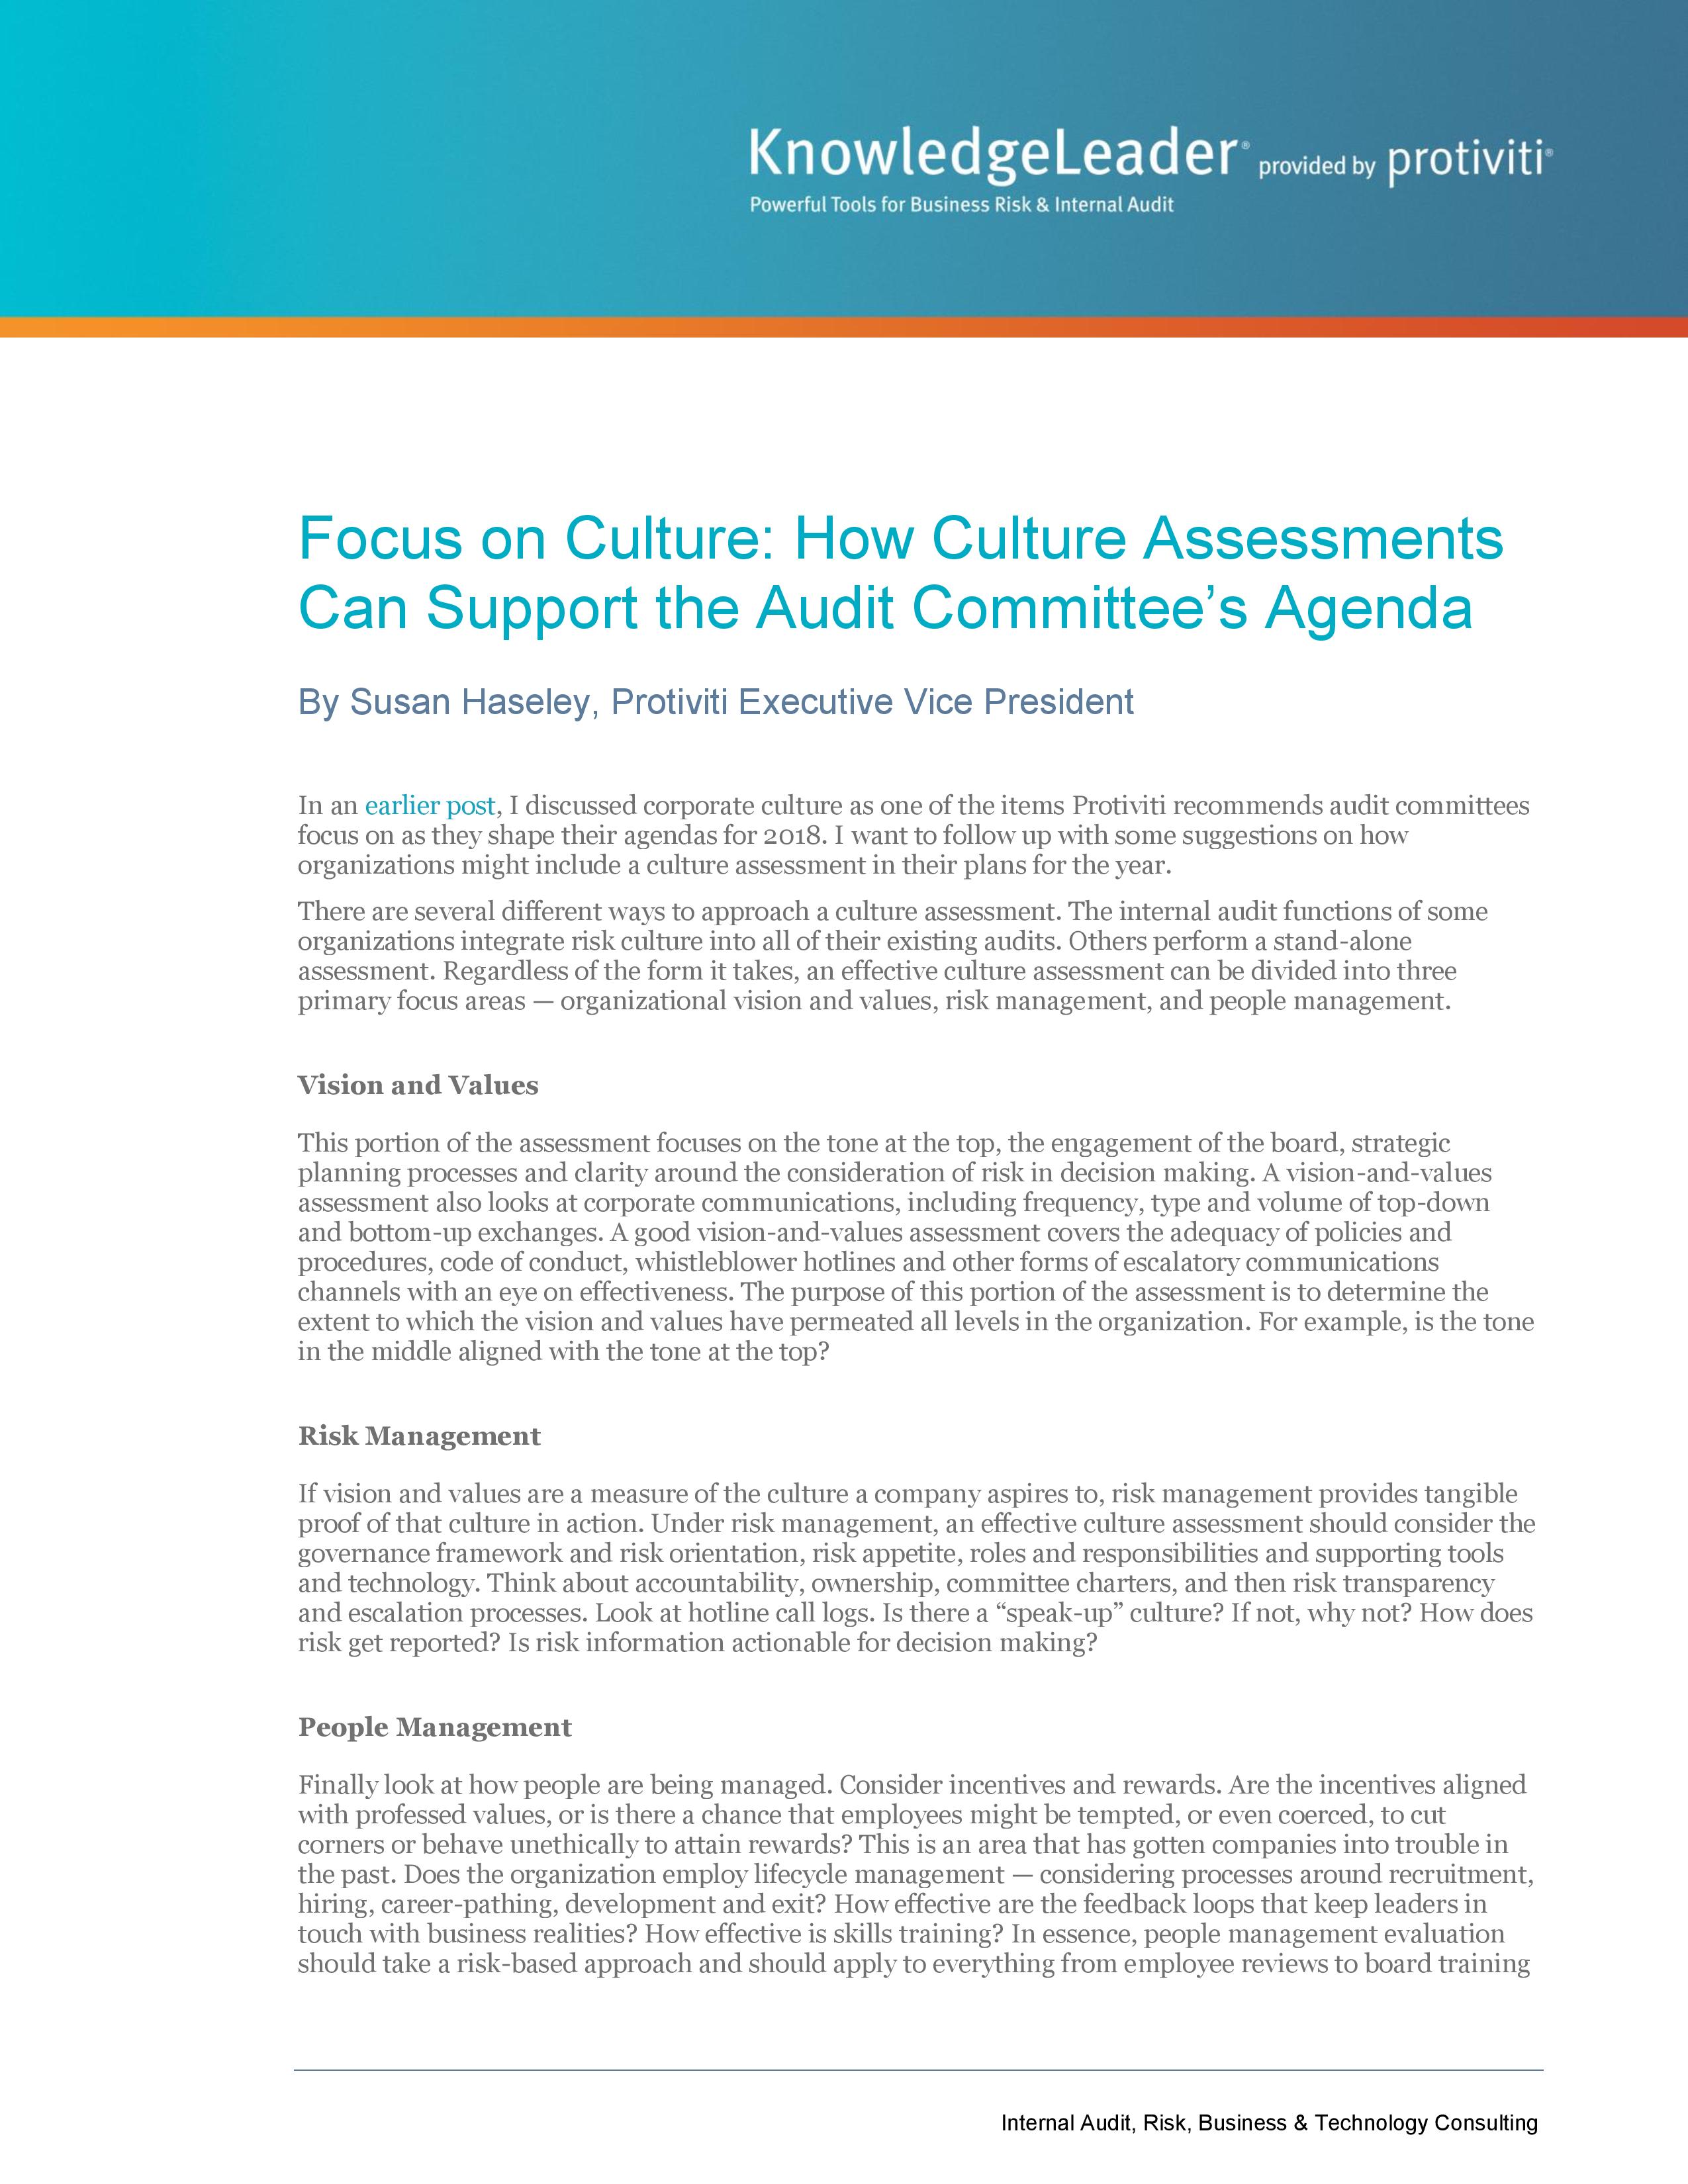 screenshot of the first page of Focus on Culture-How Culture Assessments Can Support the Audit Committee’s Agenda